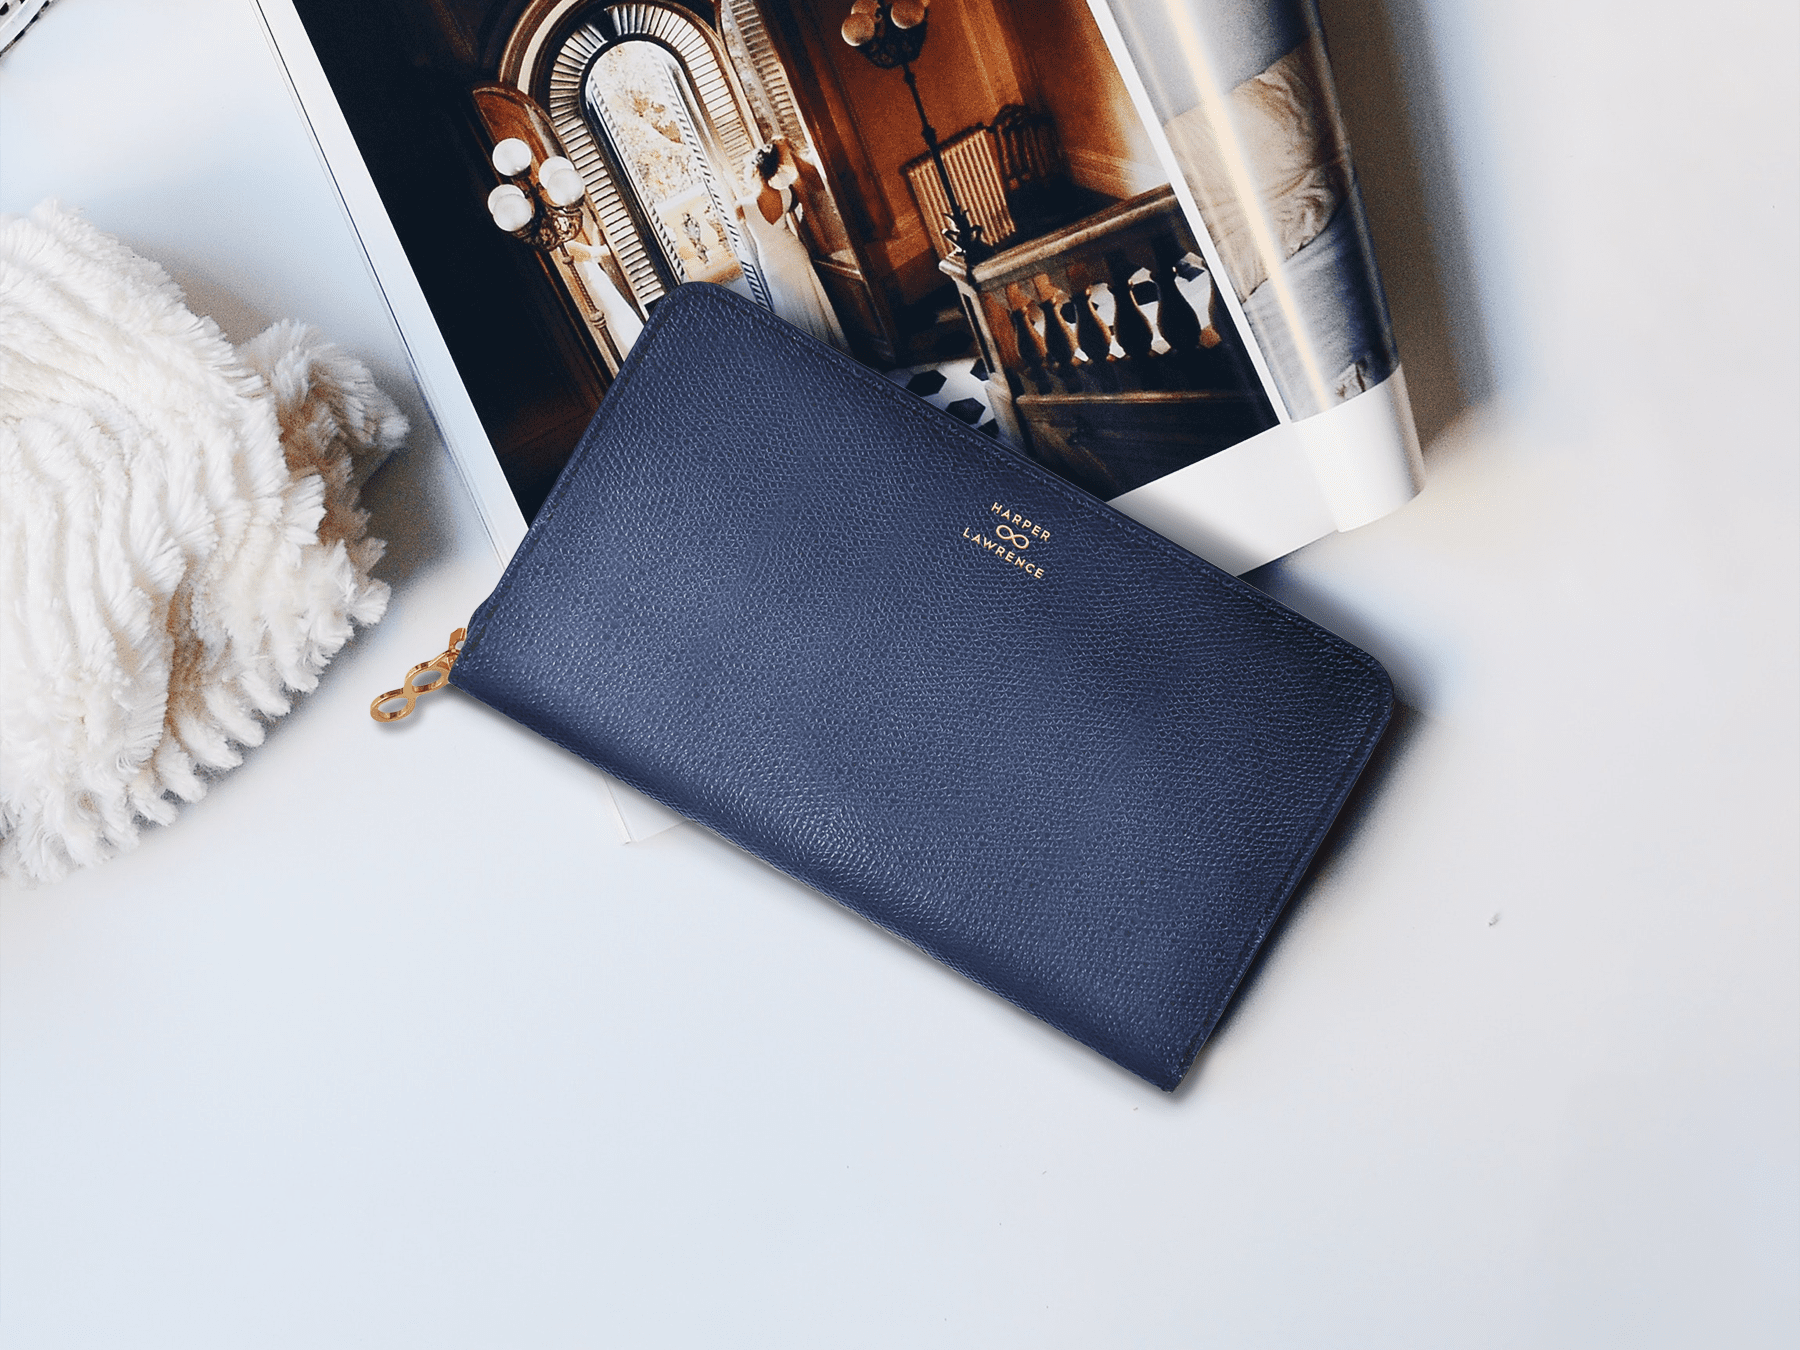 Navy clutch from Harper Lawrence placed on a fashion magazine